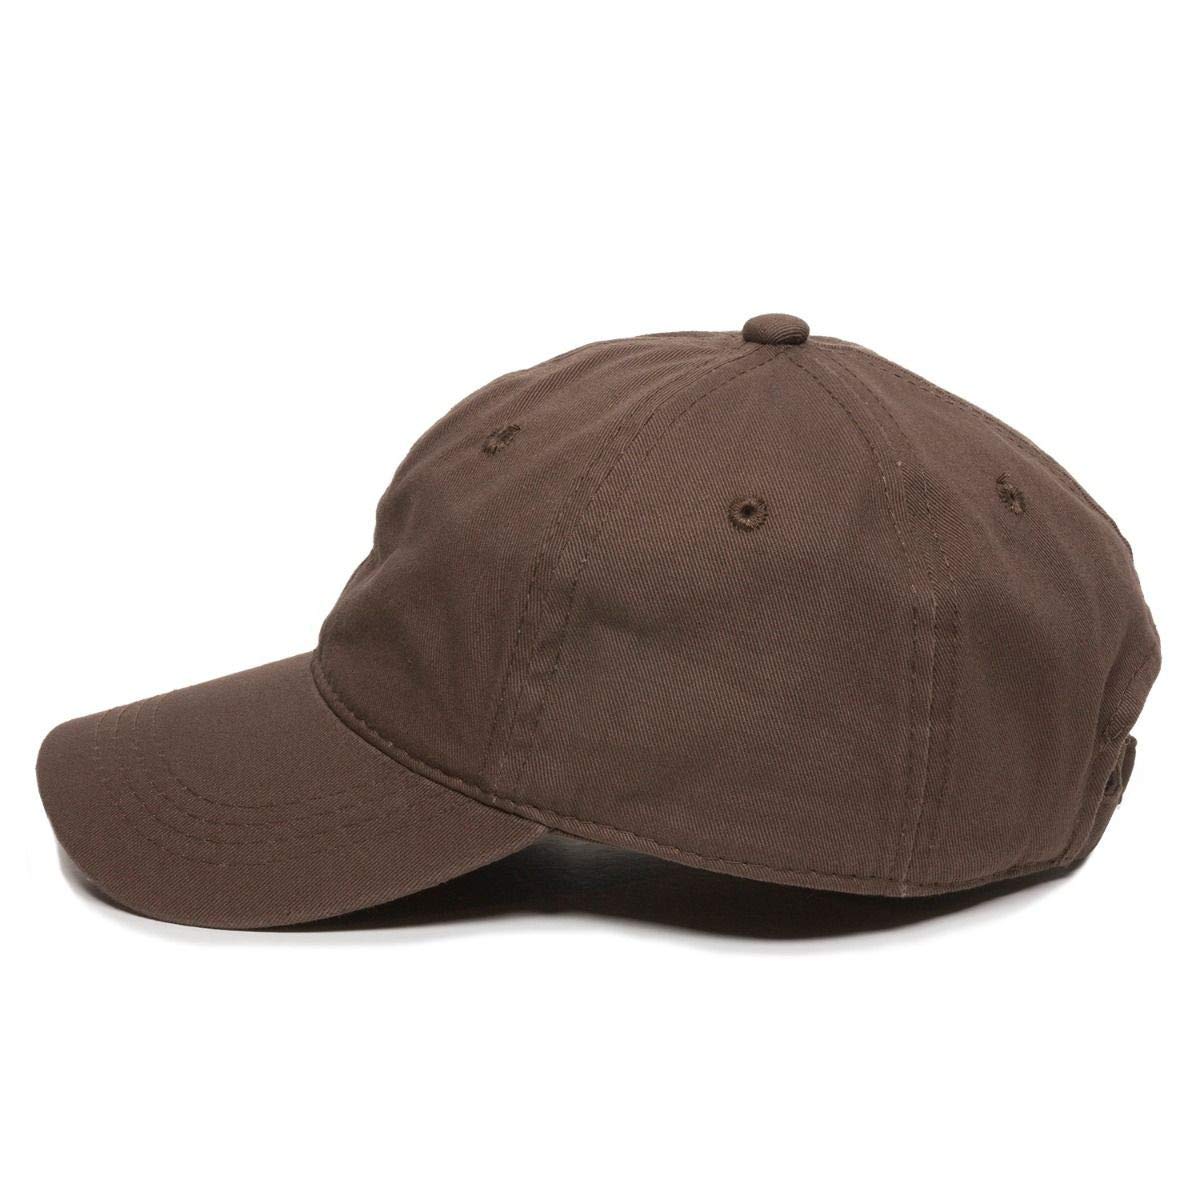 Bicycle Bike Baseball Cap Embroidered Cotton Adjustable Dad Hat Brown